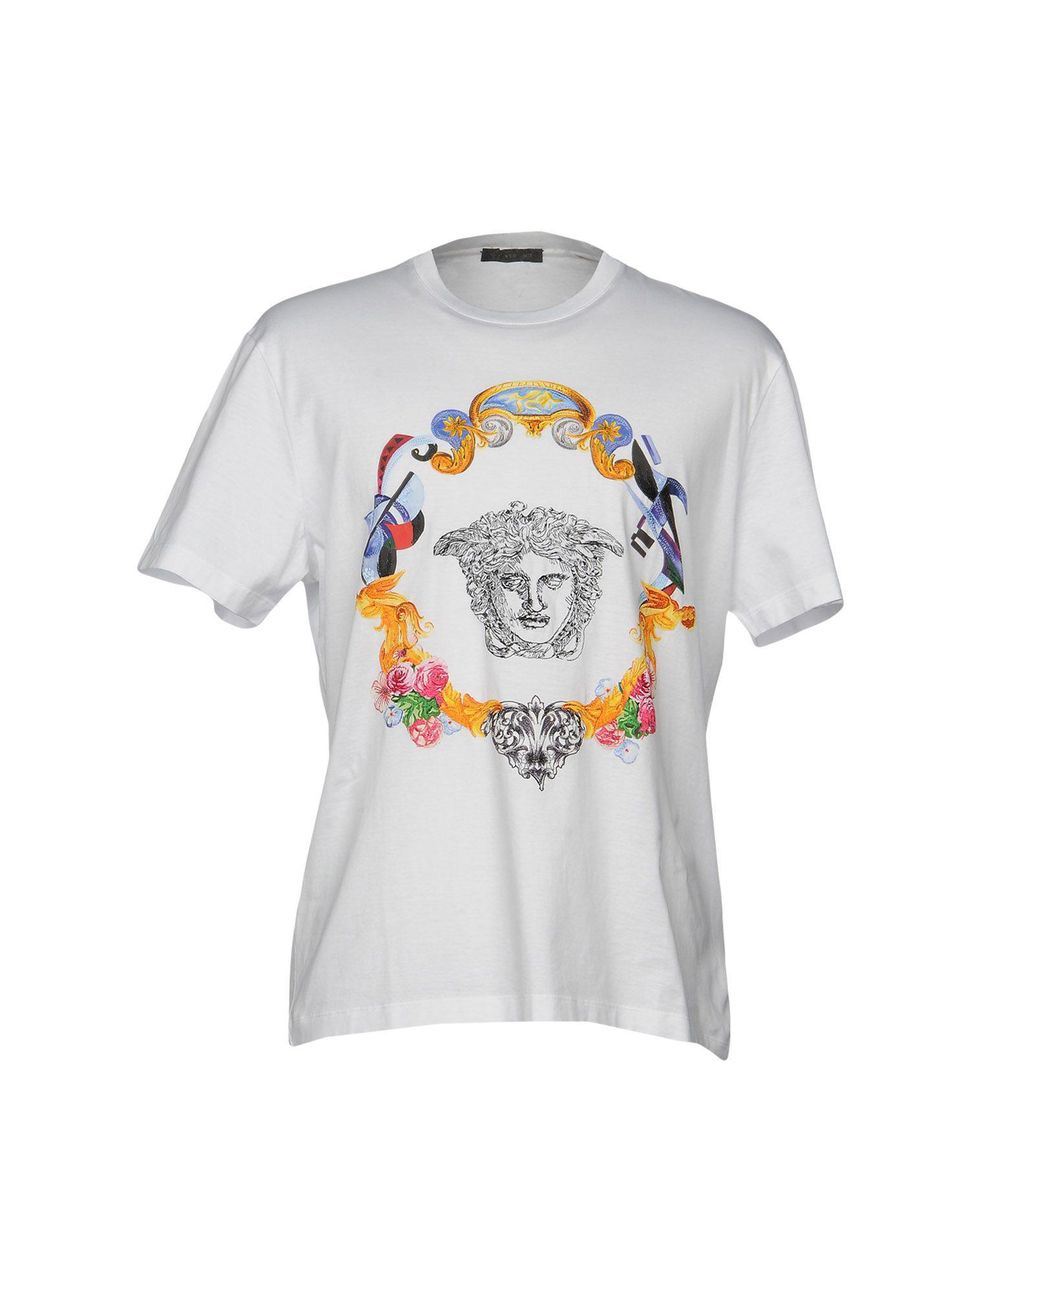 Versace T-shirt in White for Men - Lyst